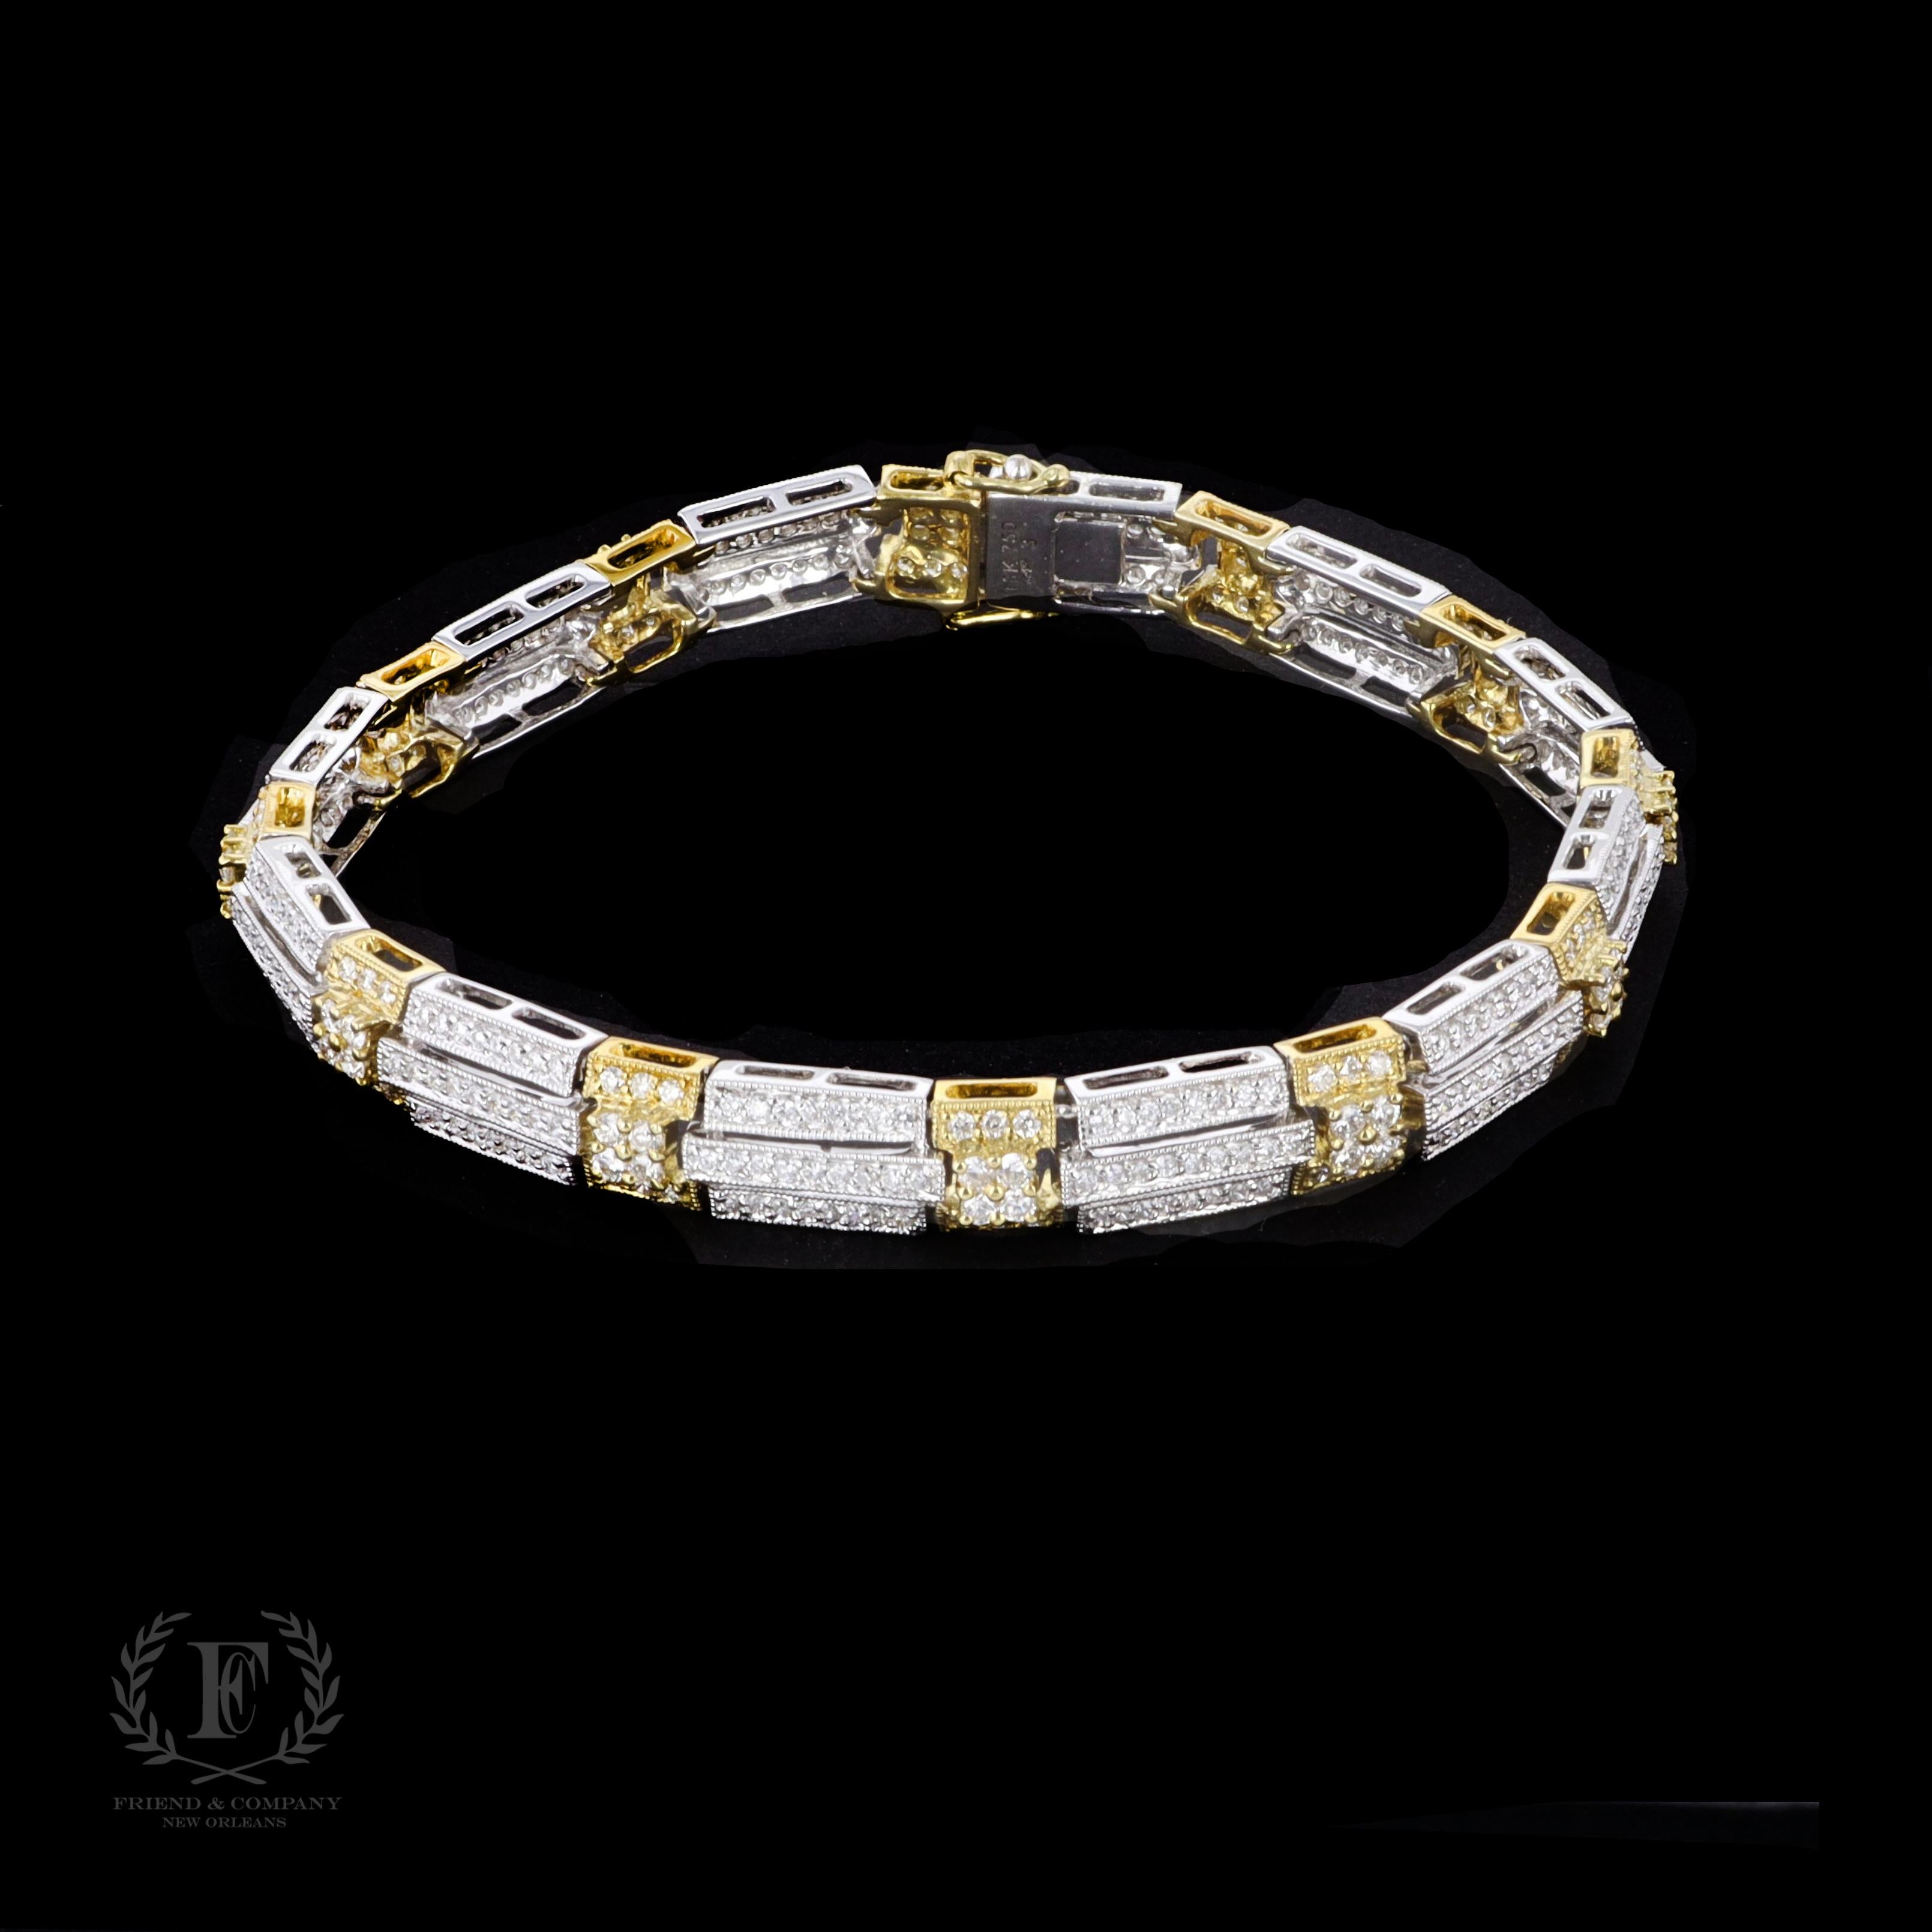 This sparkling estate bracelet is set with beautiful round cut diamonds that weigh approximately 4.00 carats. The color of the diamonds is G with VS clarity. The bracelet measures 7 millimeters in width and 7 inches in length. The bracelet is